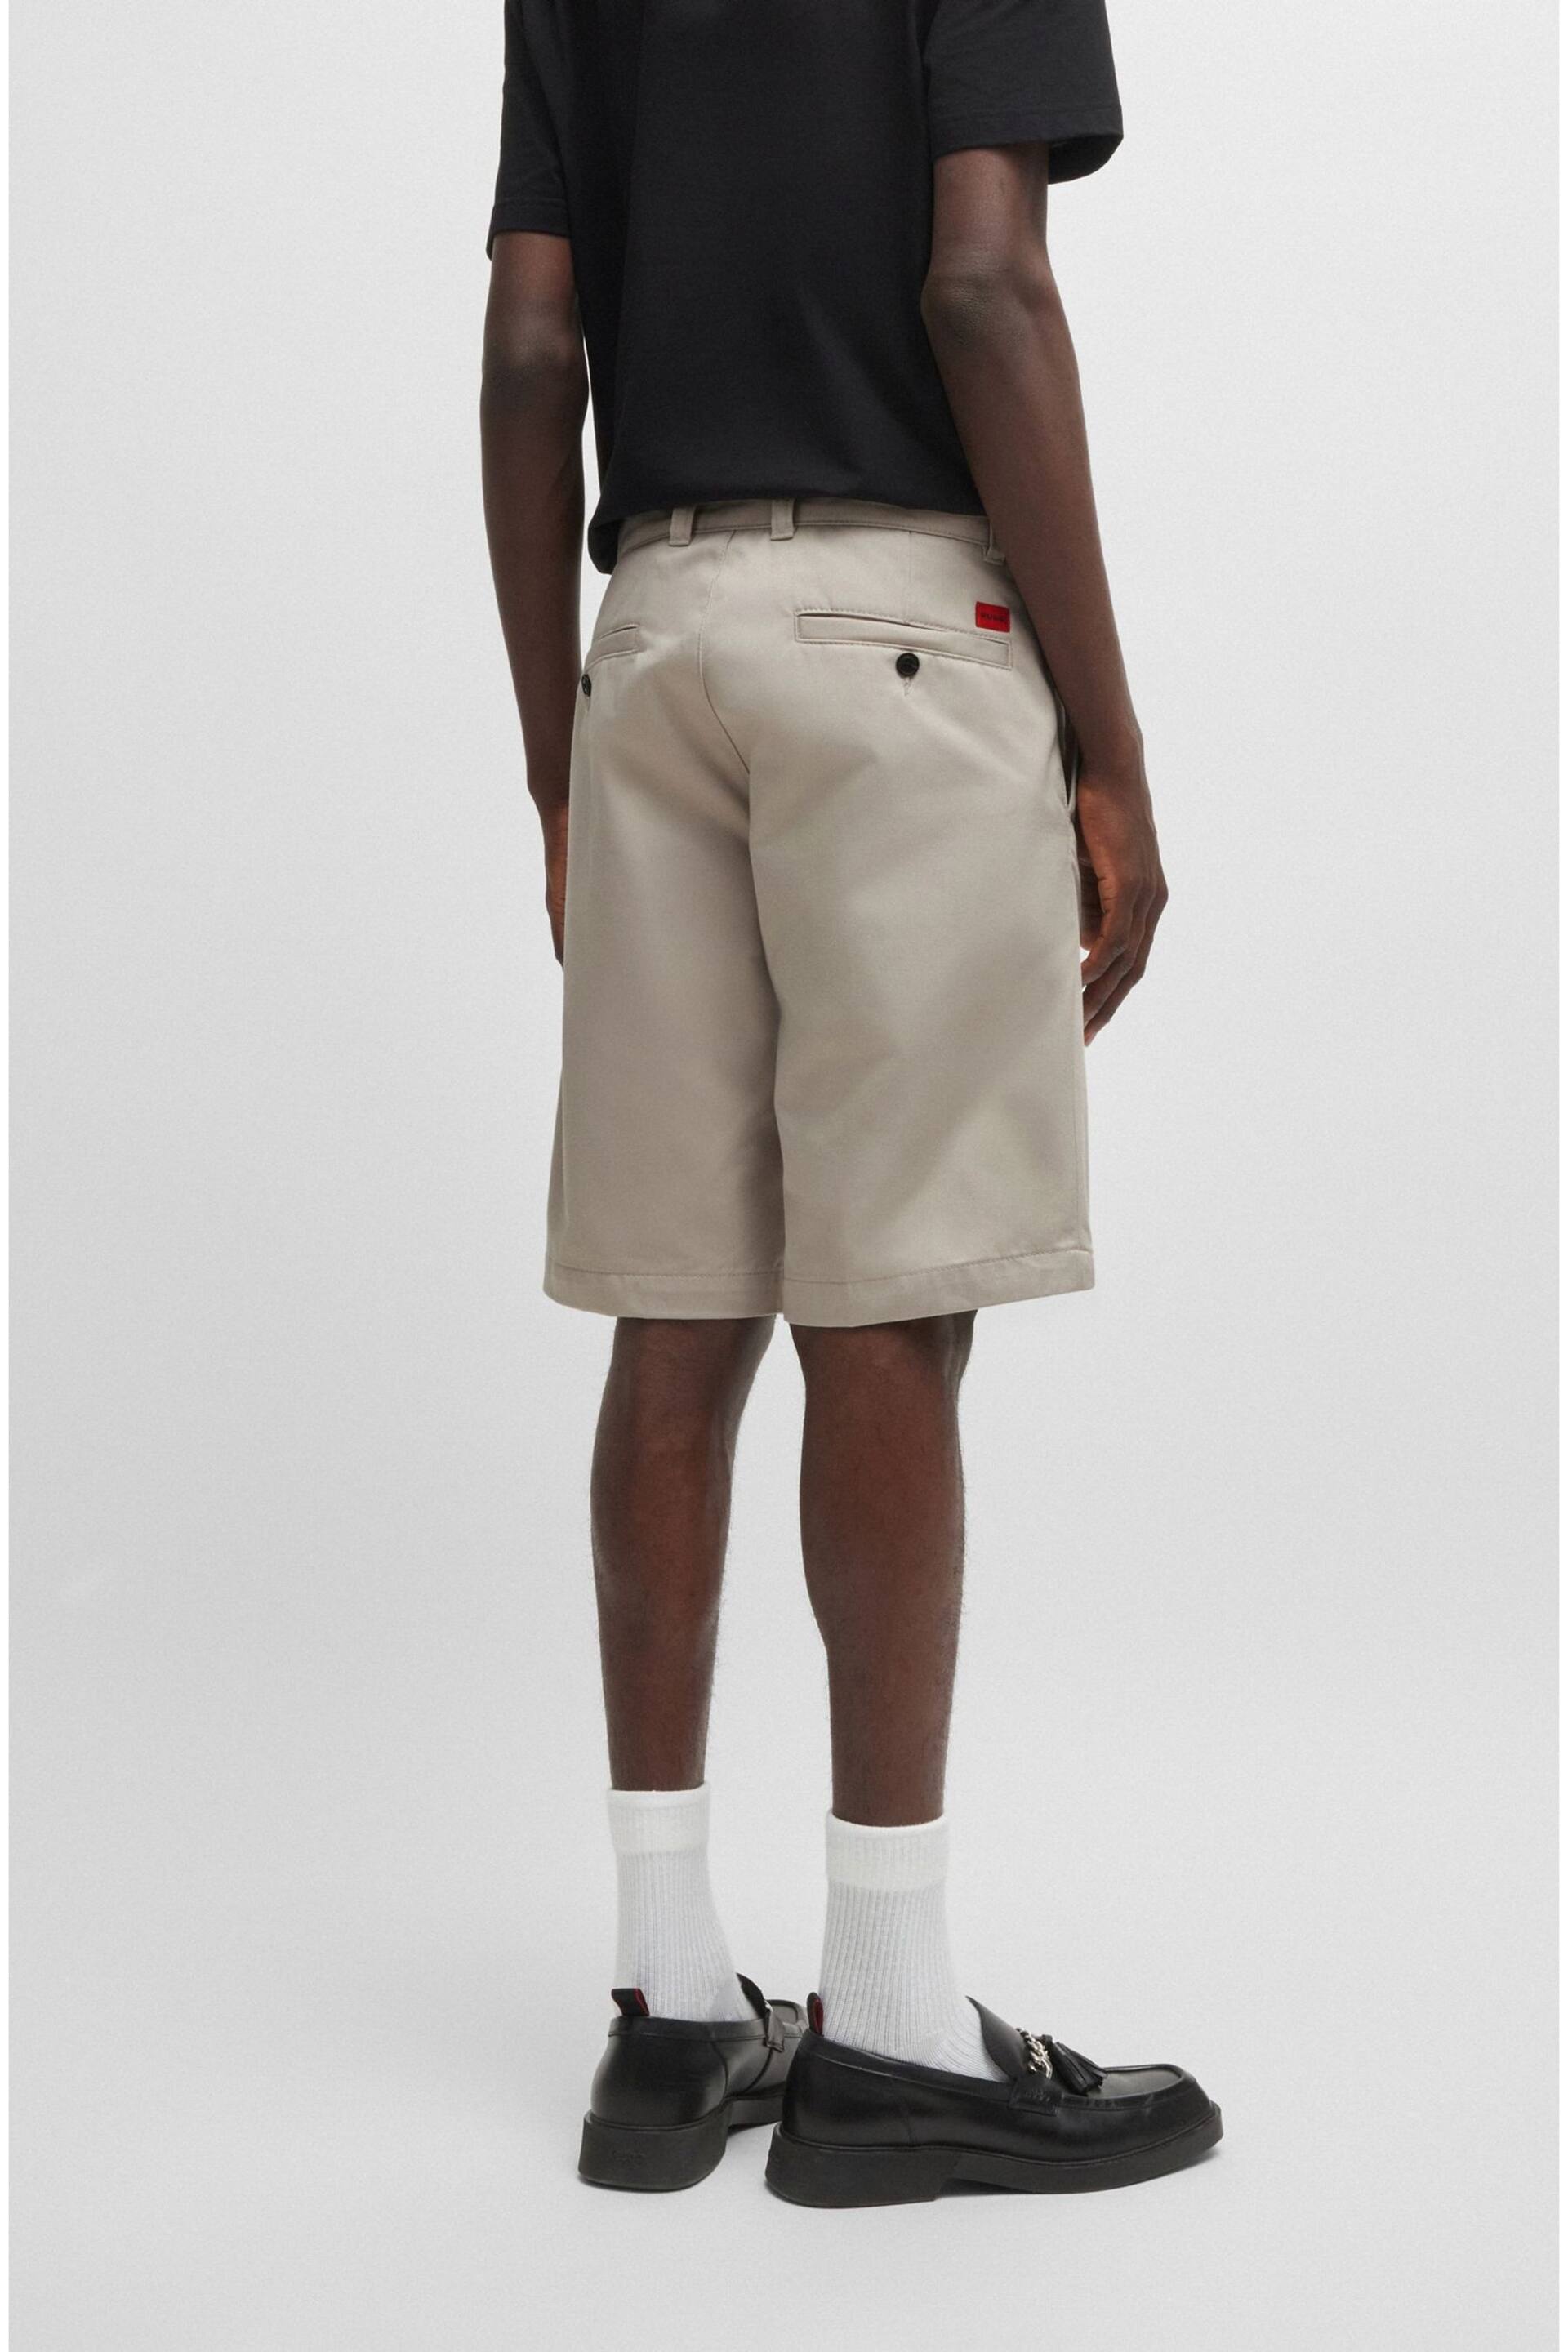 HUGO Regular-fit shorts with slim leg and buttoned pockets - Image 2 of 5